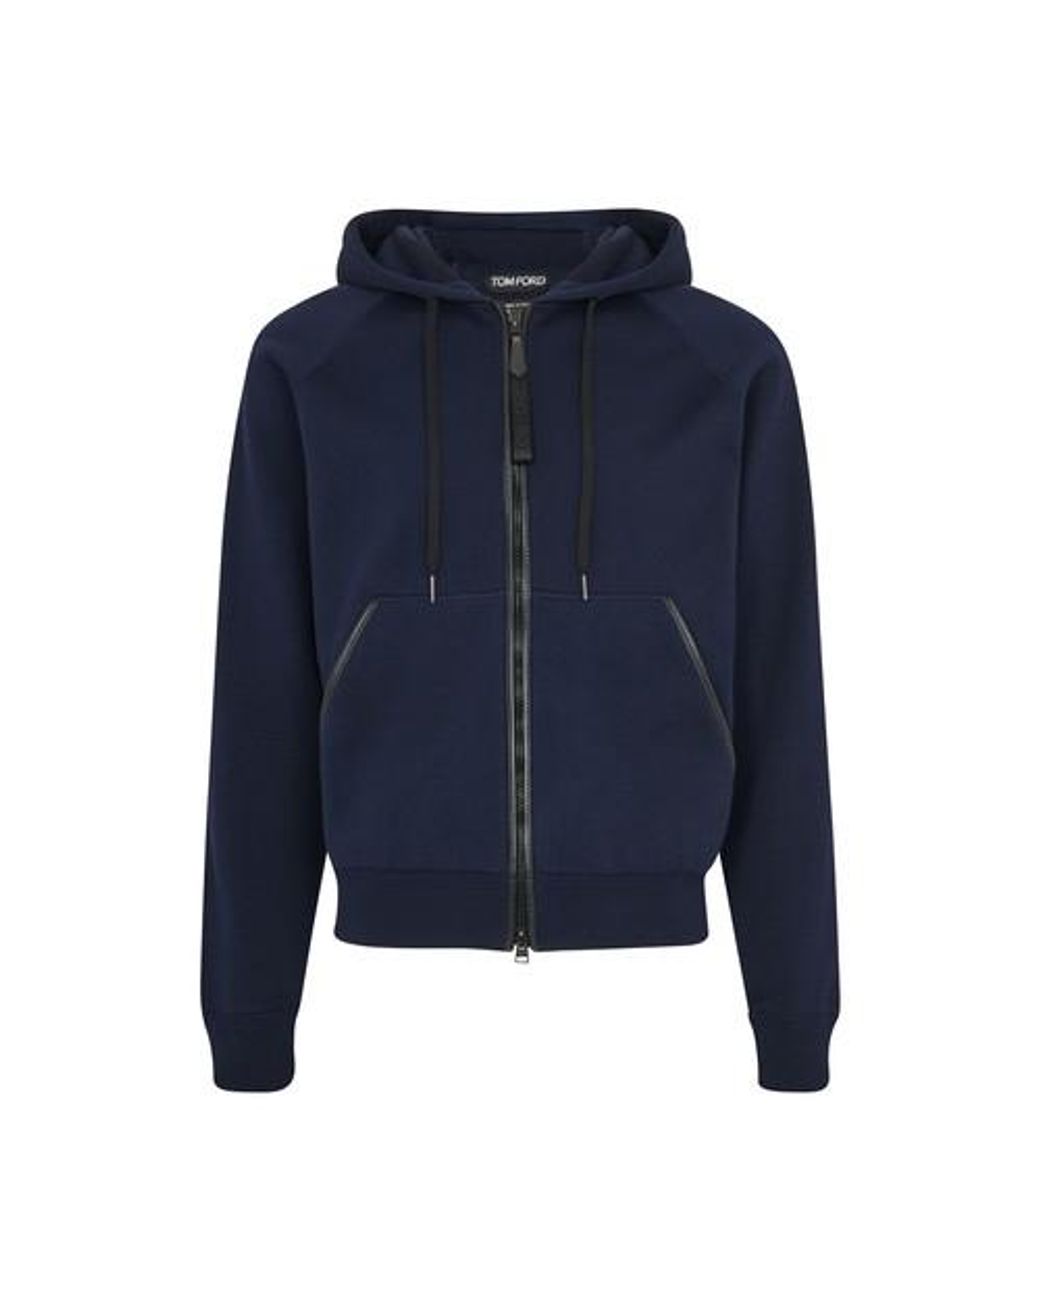 Tom Ford Zipped Hoodie in Navy (Blue) for Men - Lyst